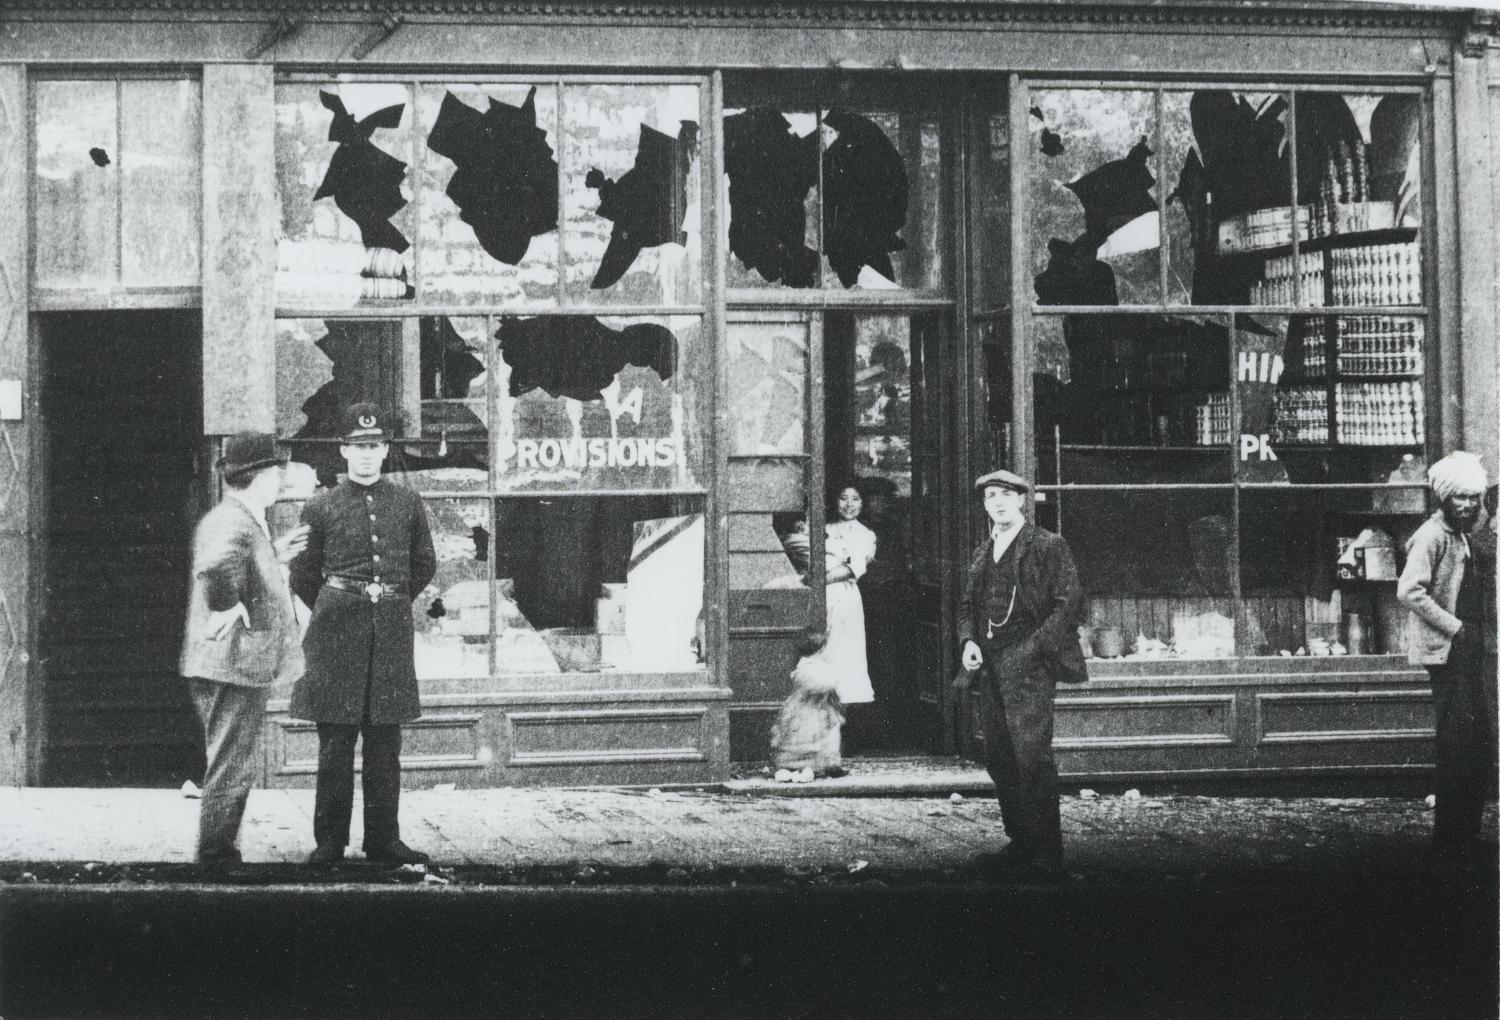 Photo of Powell Street business damaged by anti-Asian riot in 1907.